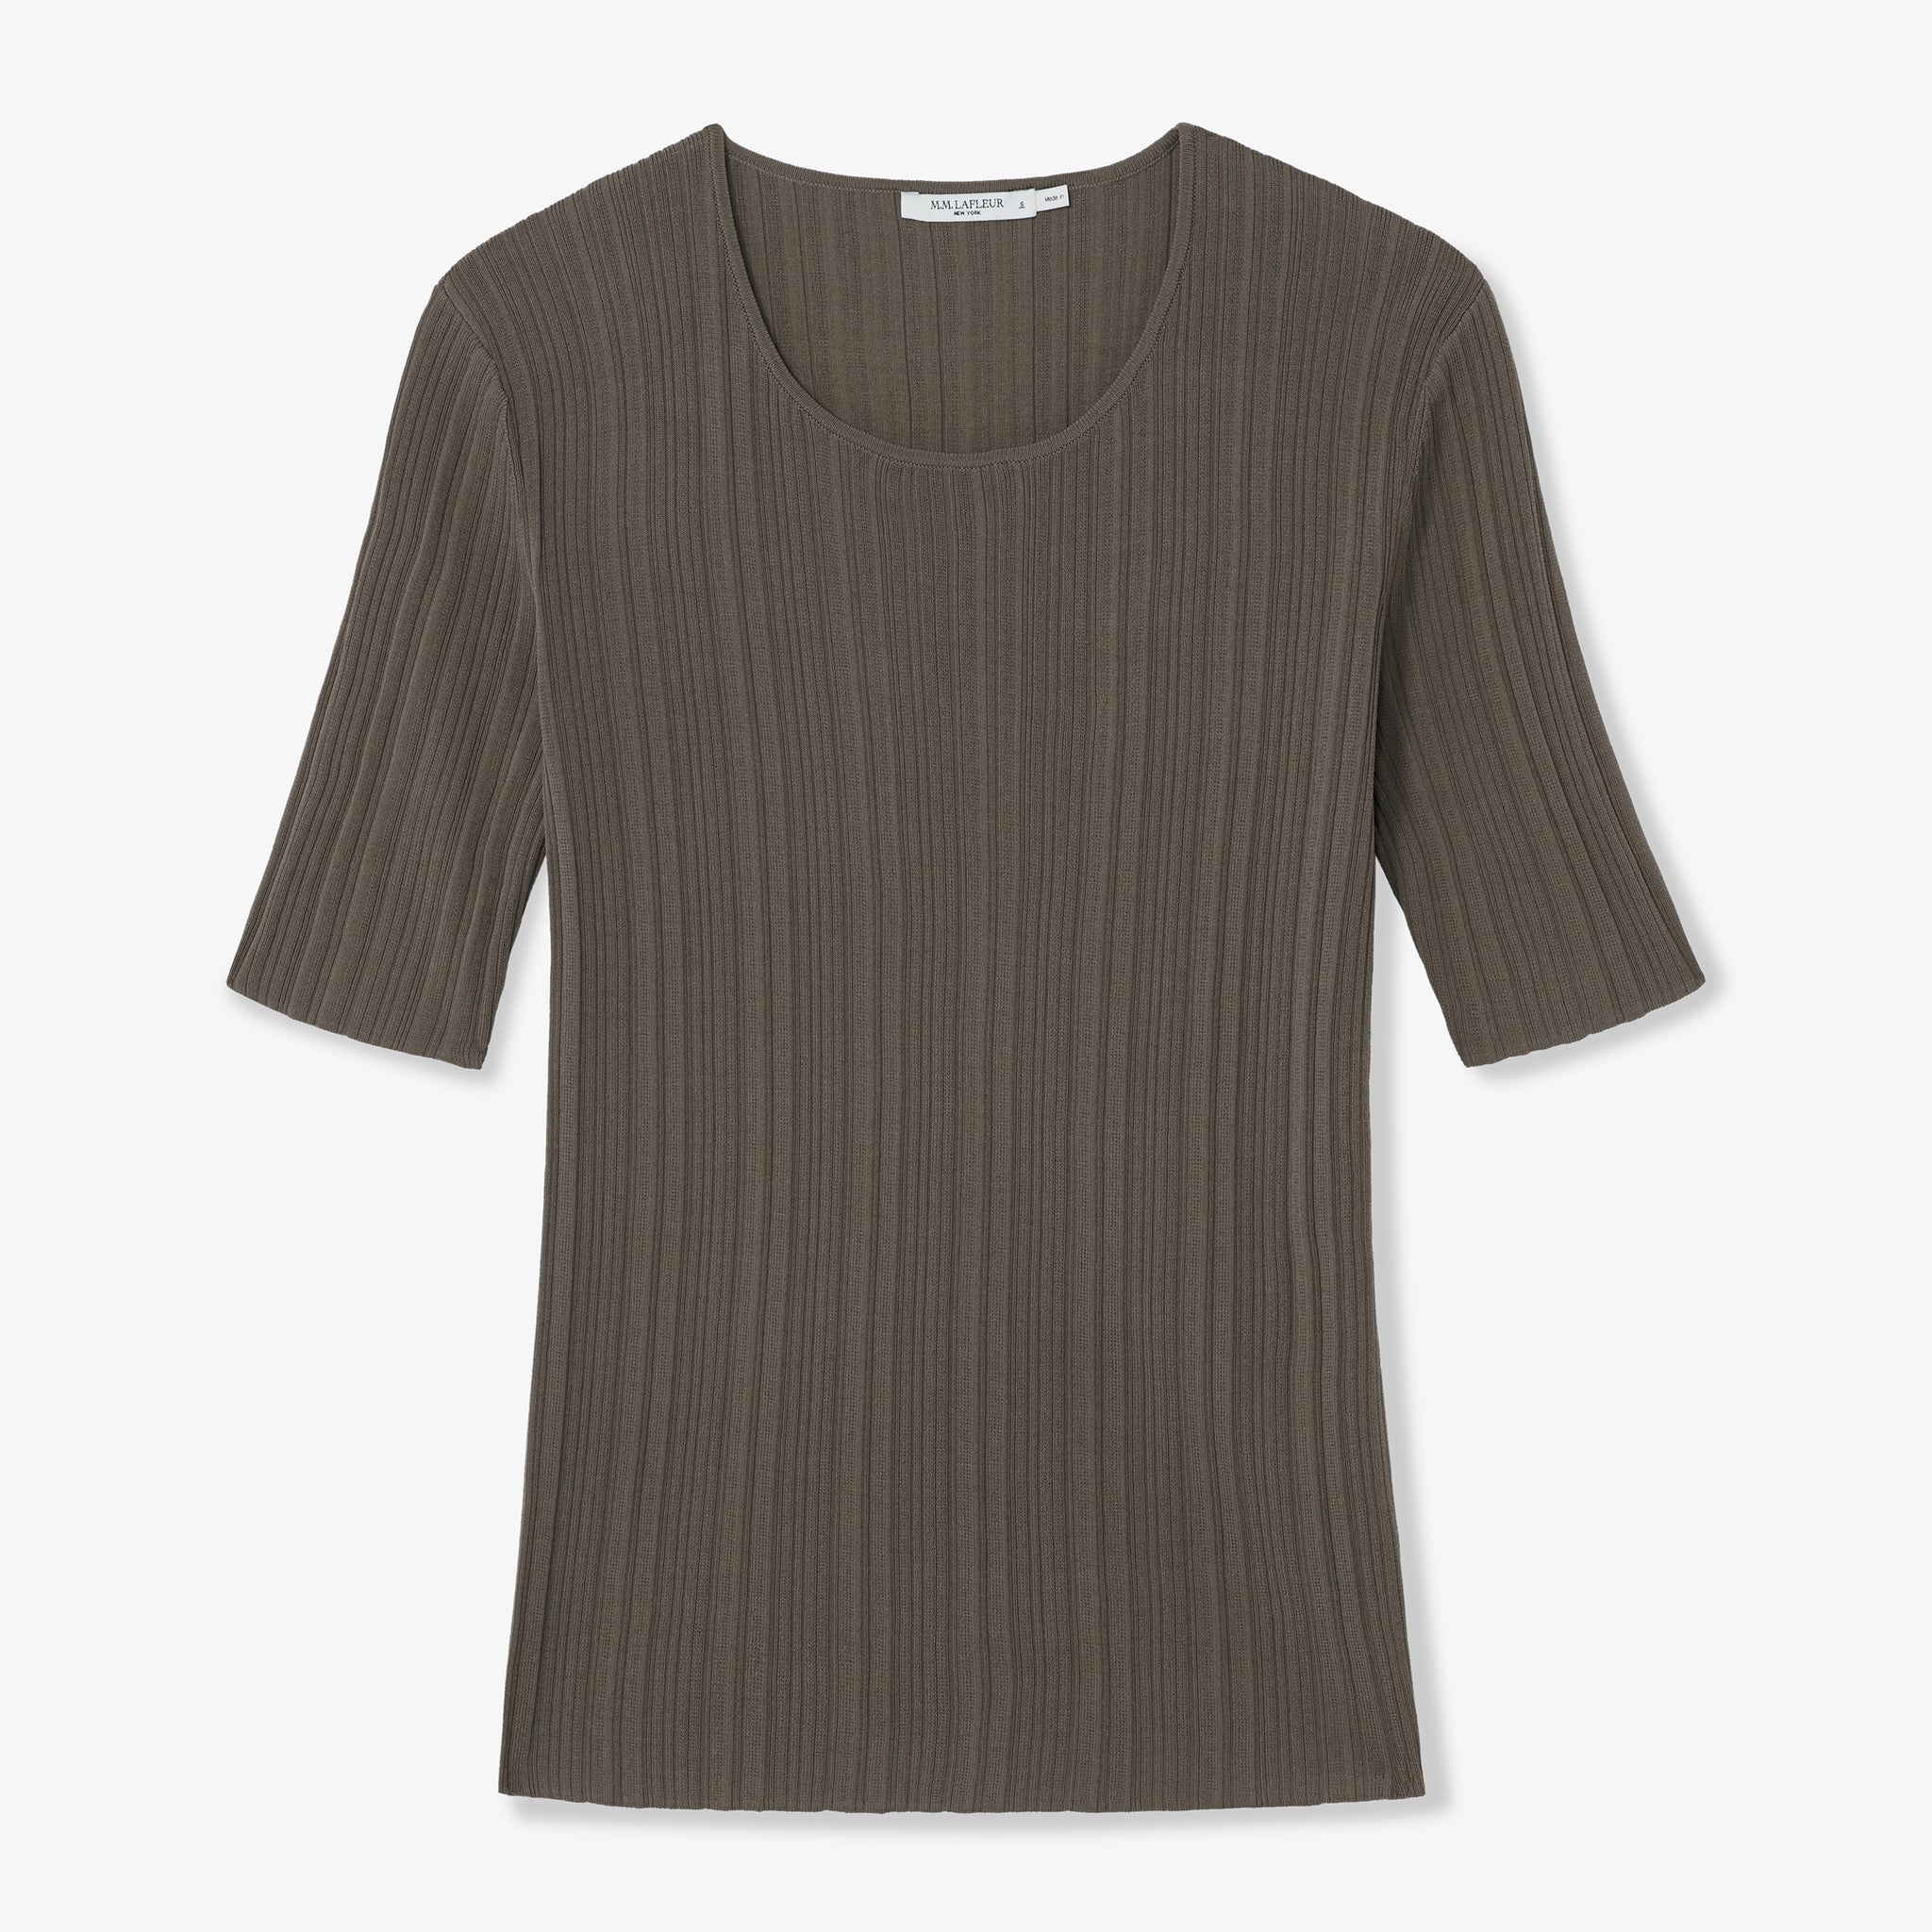 Packshot image of the Charli Top - Textured Knit in Light Ash